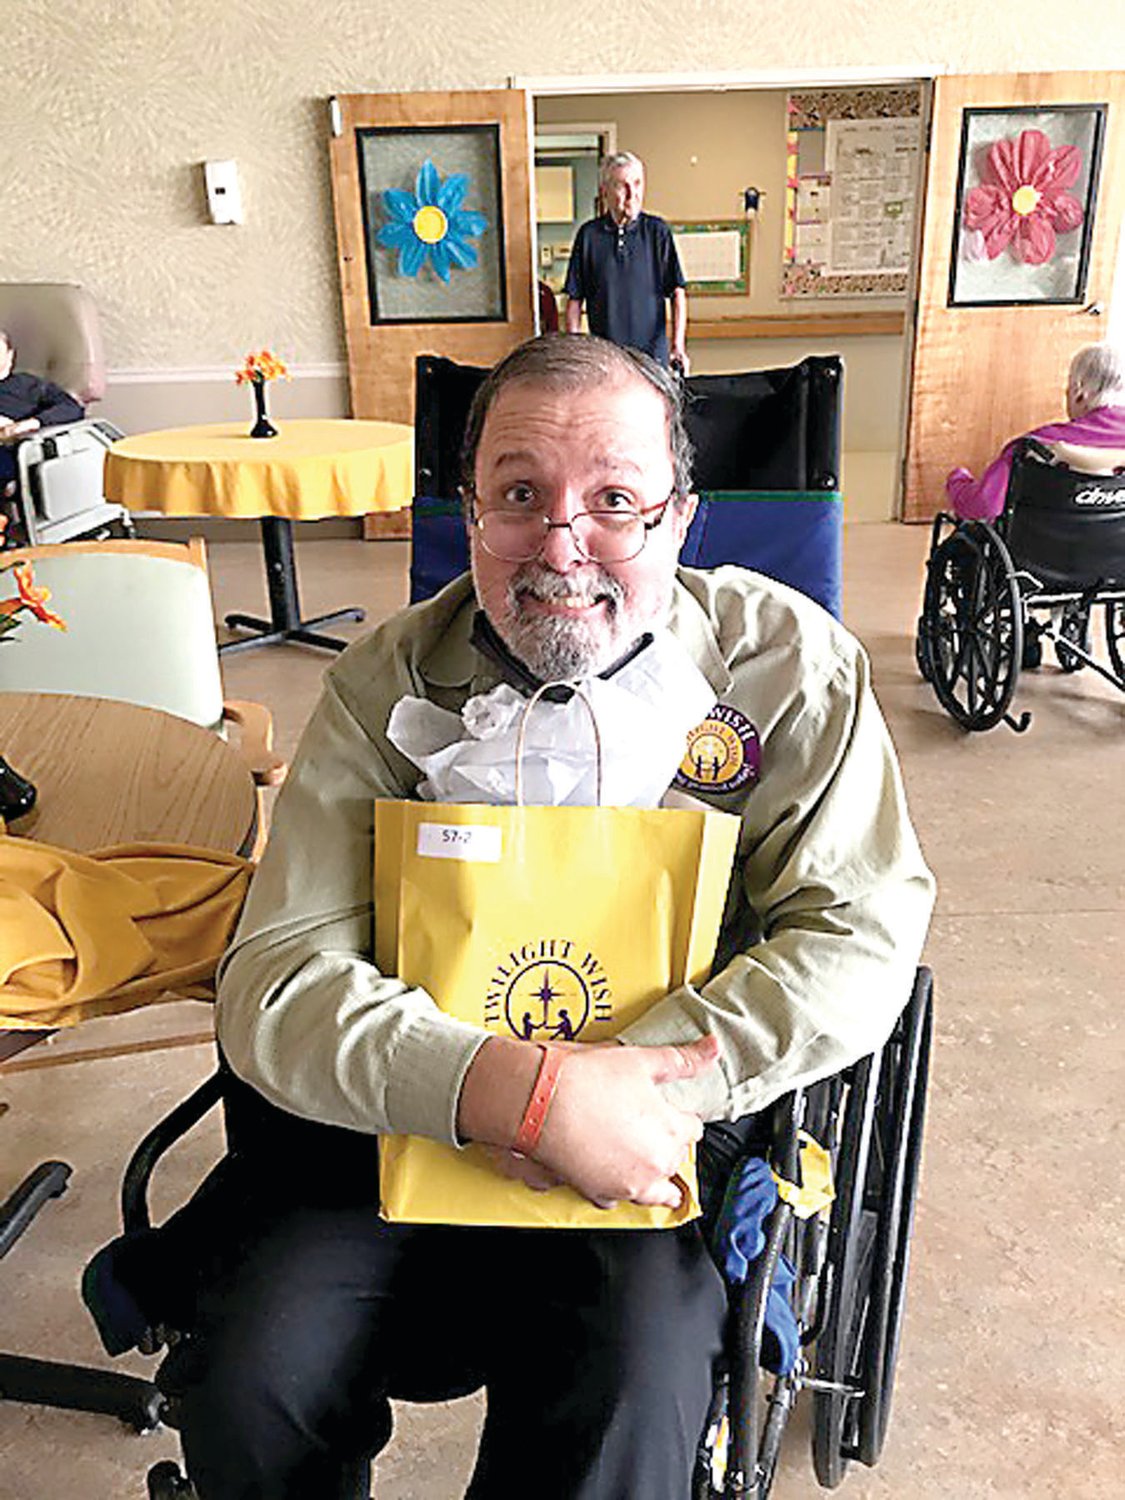 Greenleaf resident receives the office supplies he wished for.